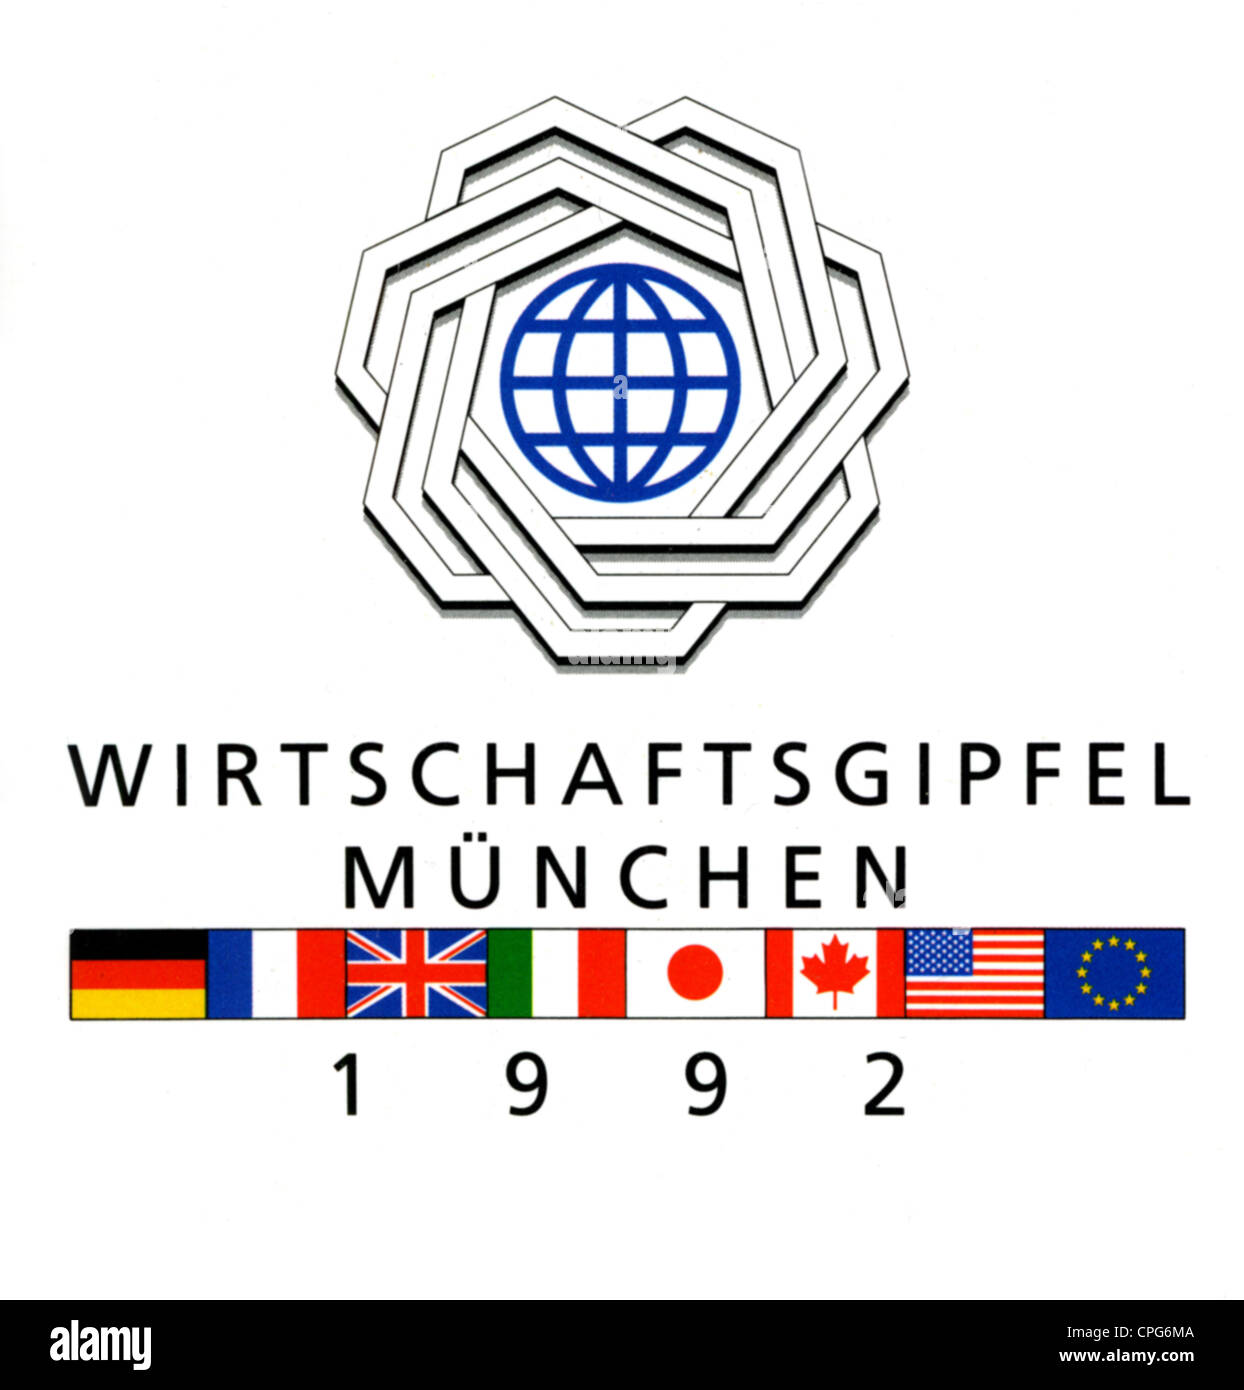 politics, conferences, G7 Summit, Munich, 6.7.- 9.7.1992, emblem, sticker, logo, flags, Germany, France, Great Britain, Italy, Japan, Canada, USA, European Union, world economy, meeting, G-7, Germany, 1990s, 20th century, historic, historical, NOT, Additional-Rights-Clearences-Not Available Stock Photo